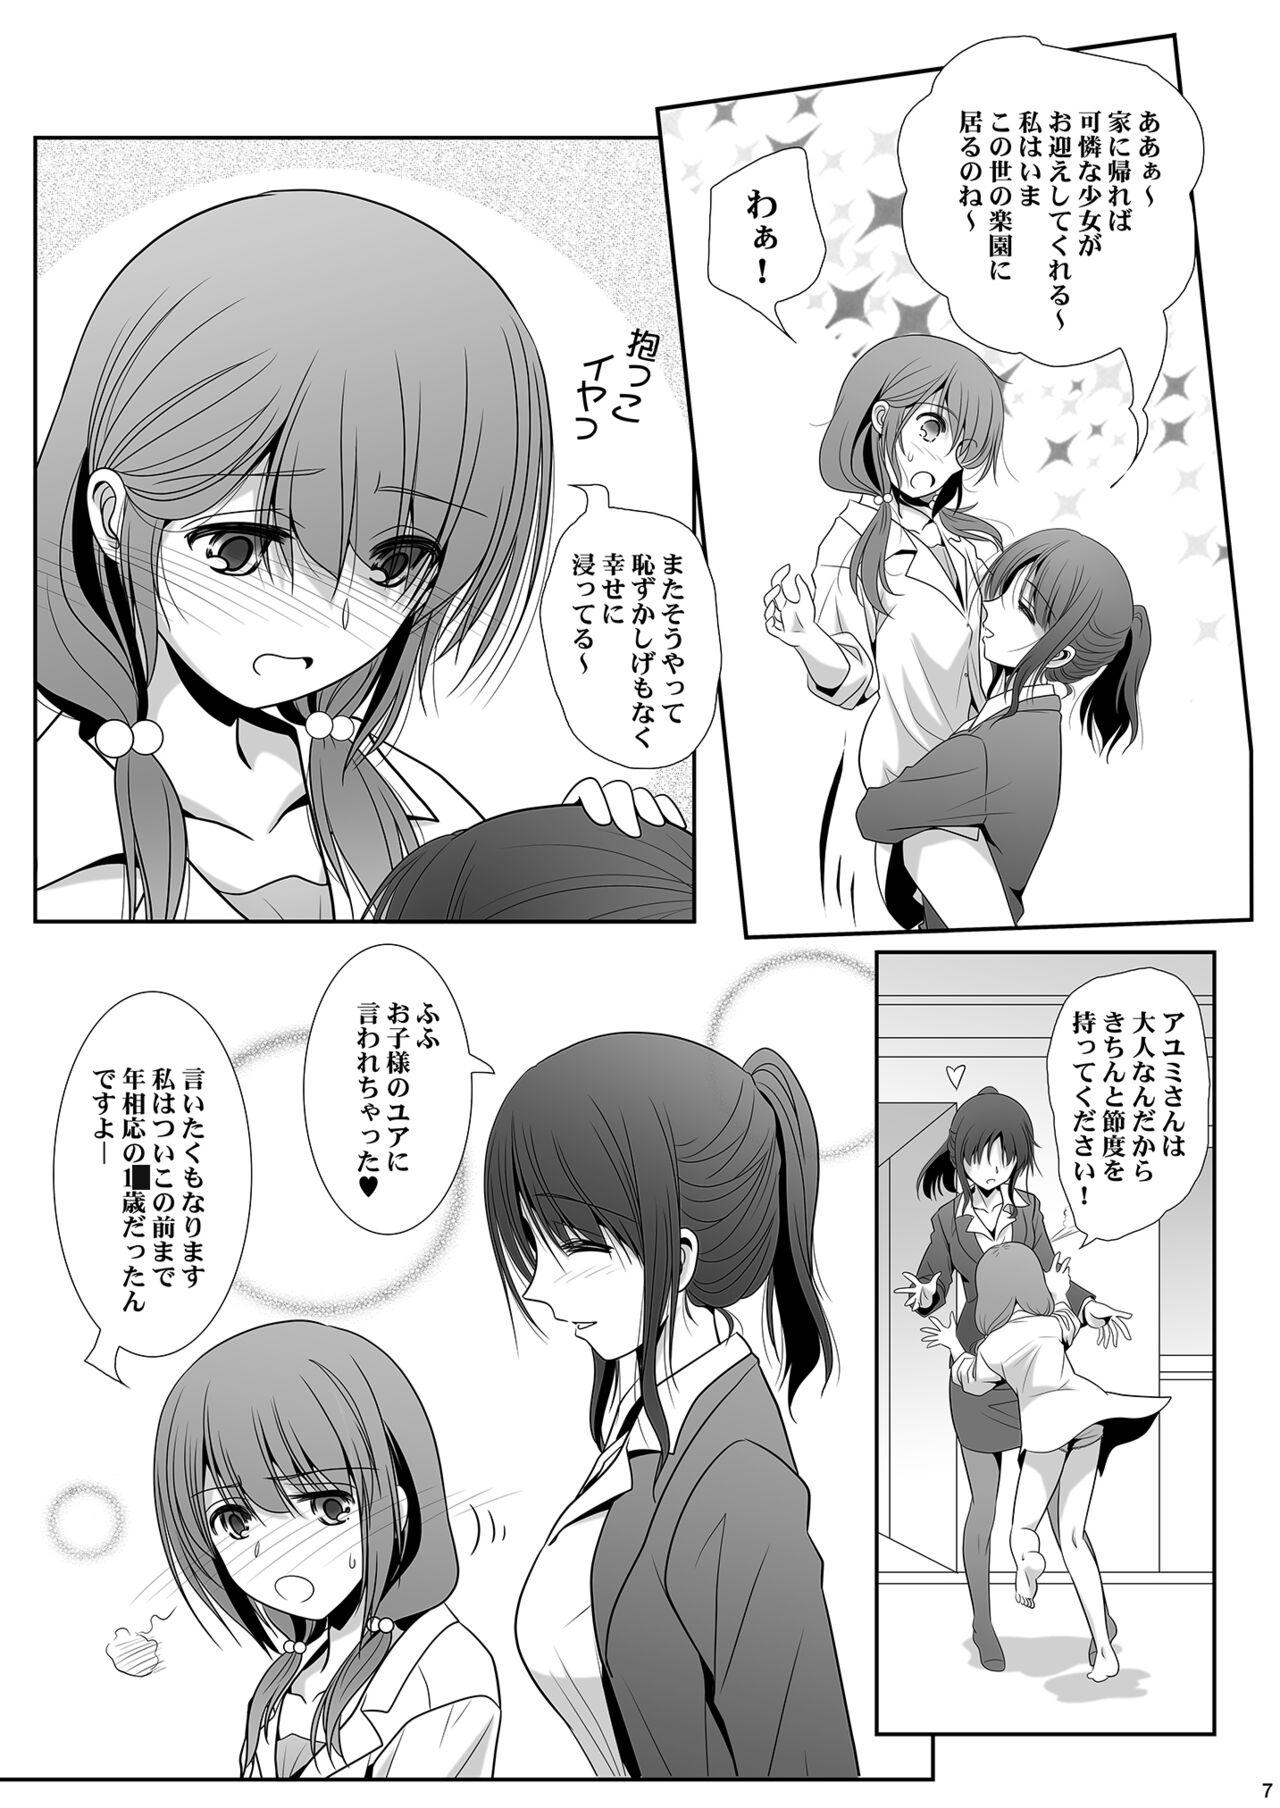 Cutie Toshi no Thirteen - Age Difference is 13 Years - Original Job - Page 7